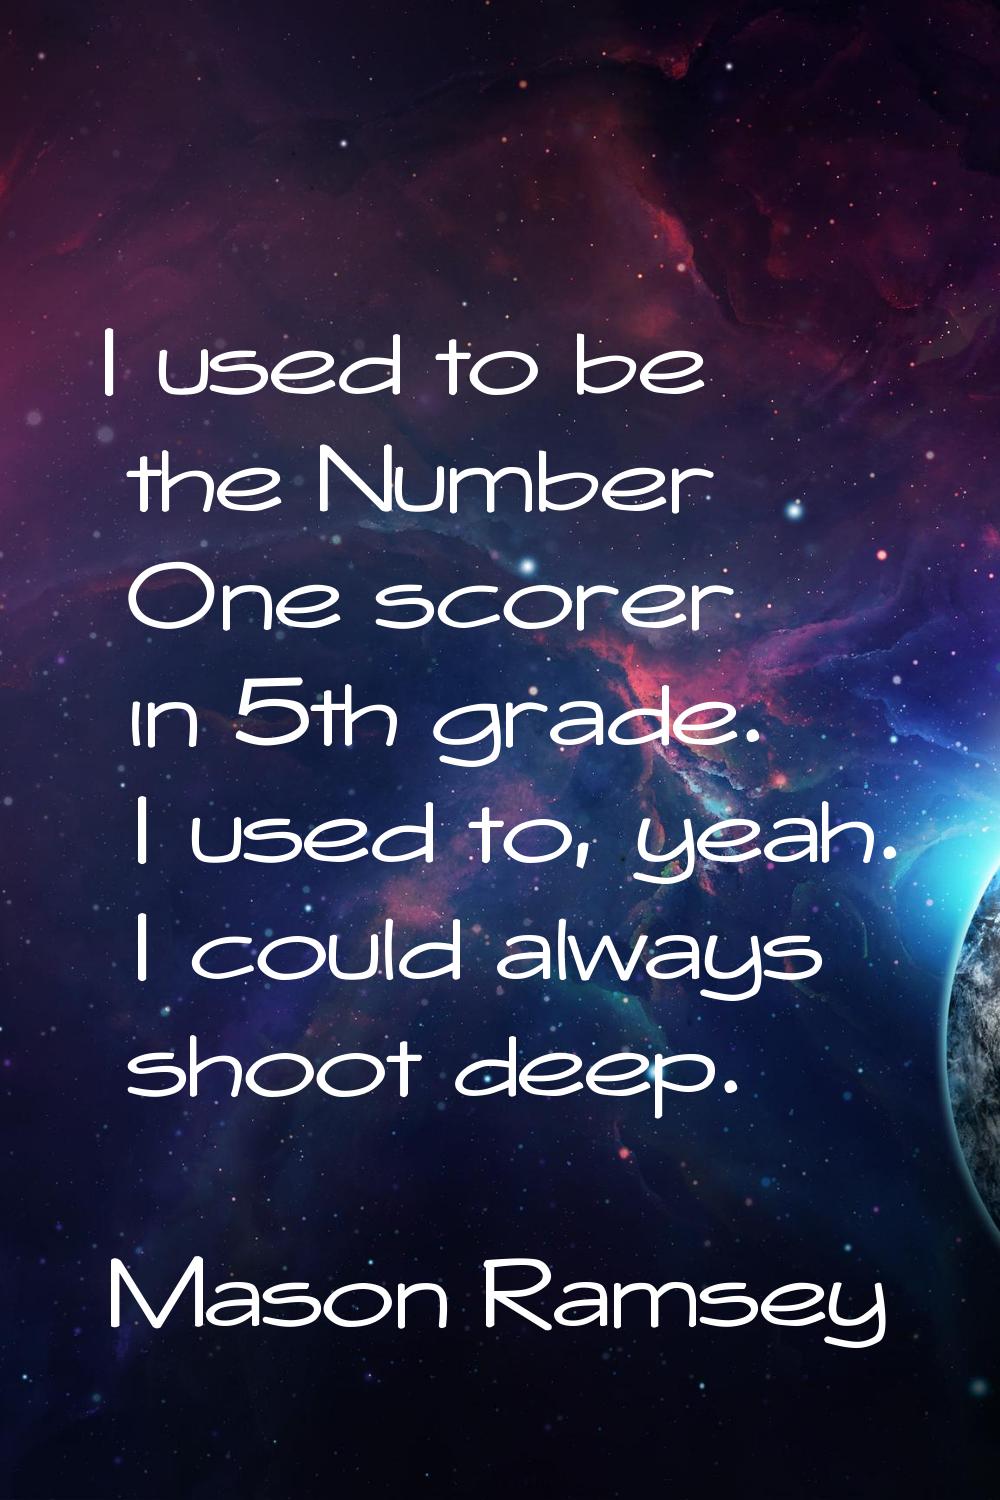 I used to be the Number One scorer in 5th grade. I used to, yeah. I could always shoot deep.